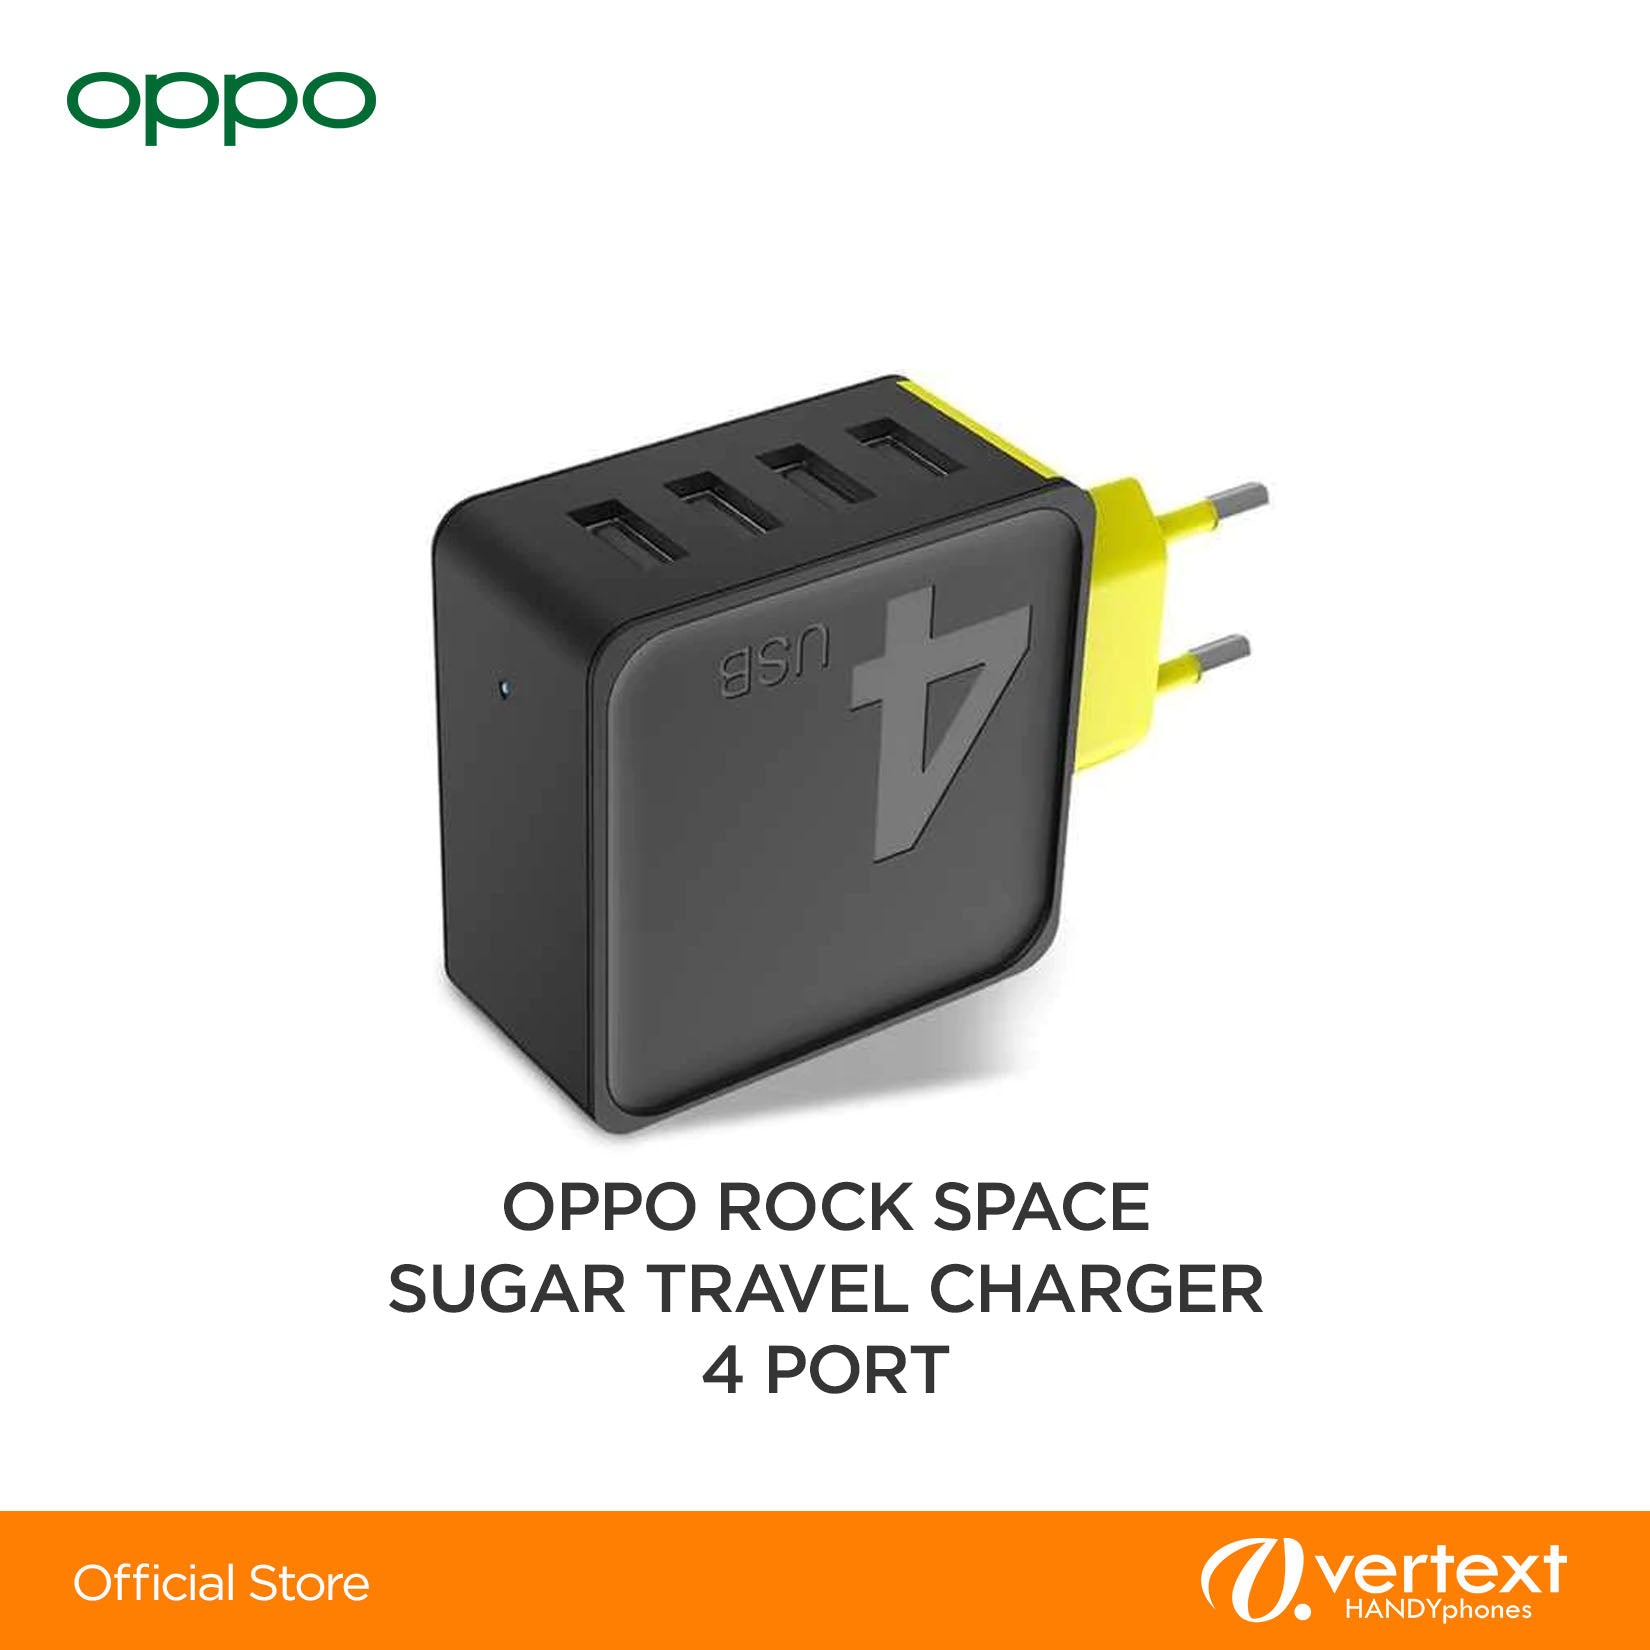 Oppo ROCK SPACE SUGAR TRAVEL CHARGER (4-PORT)